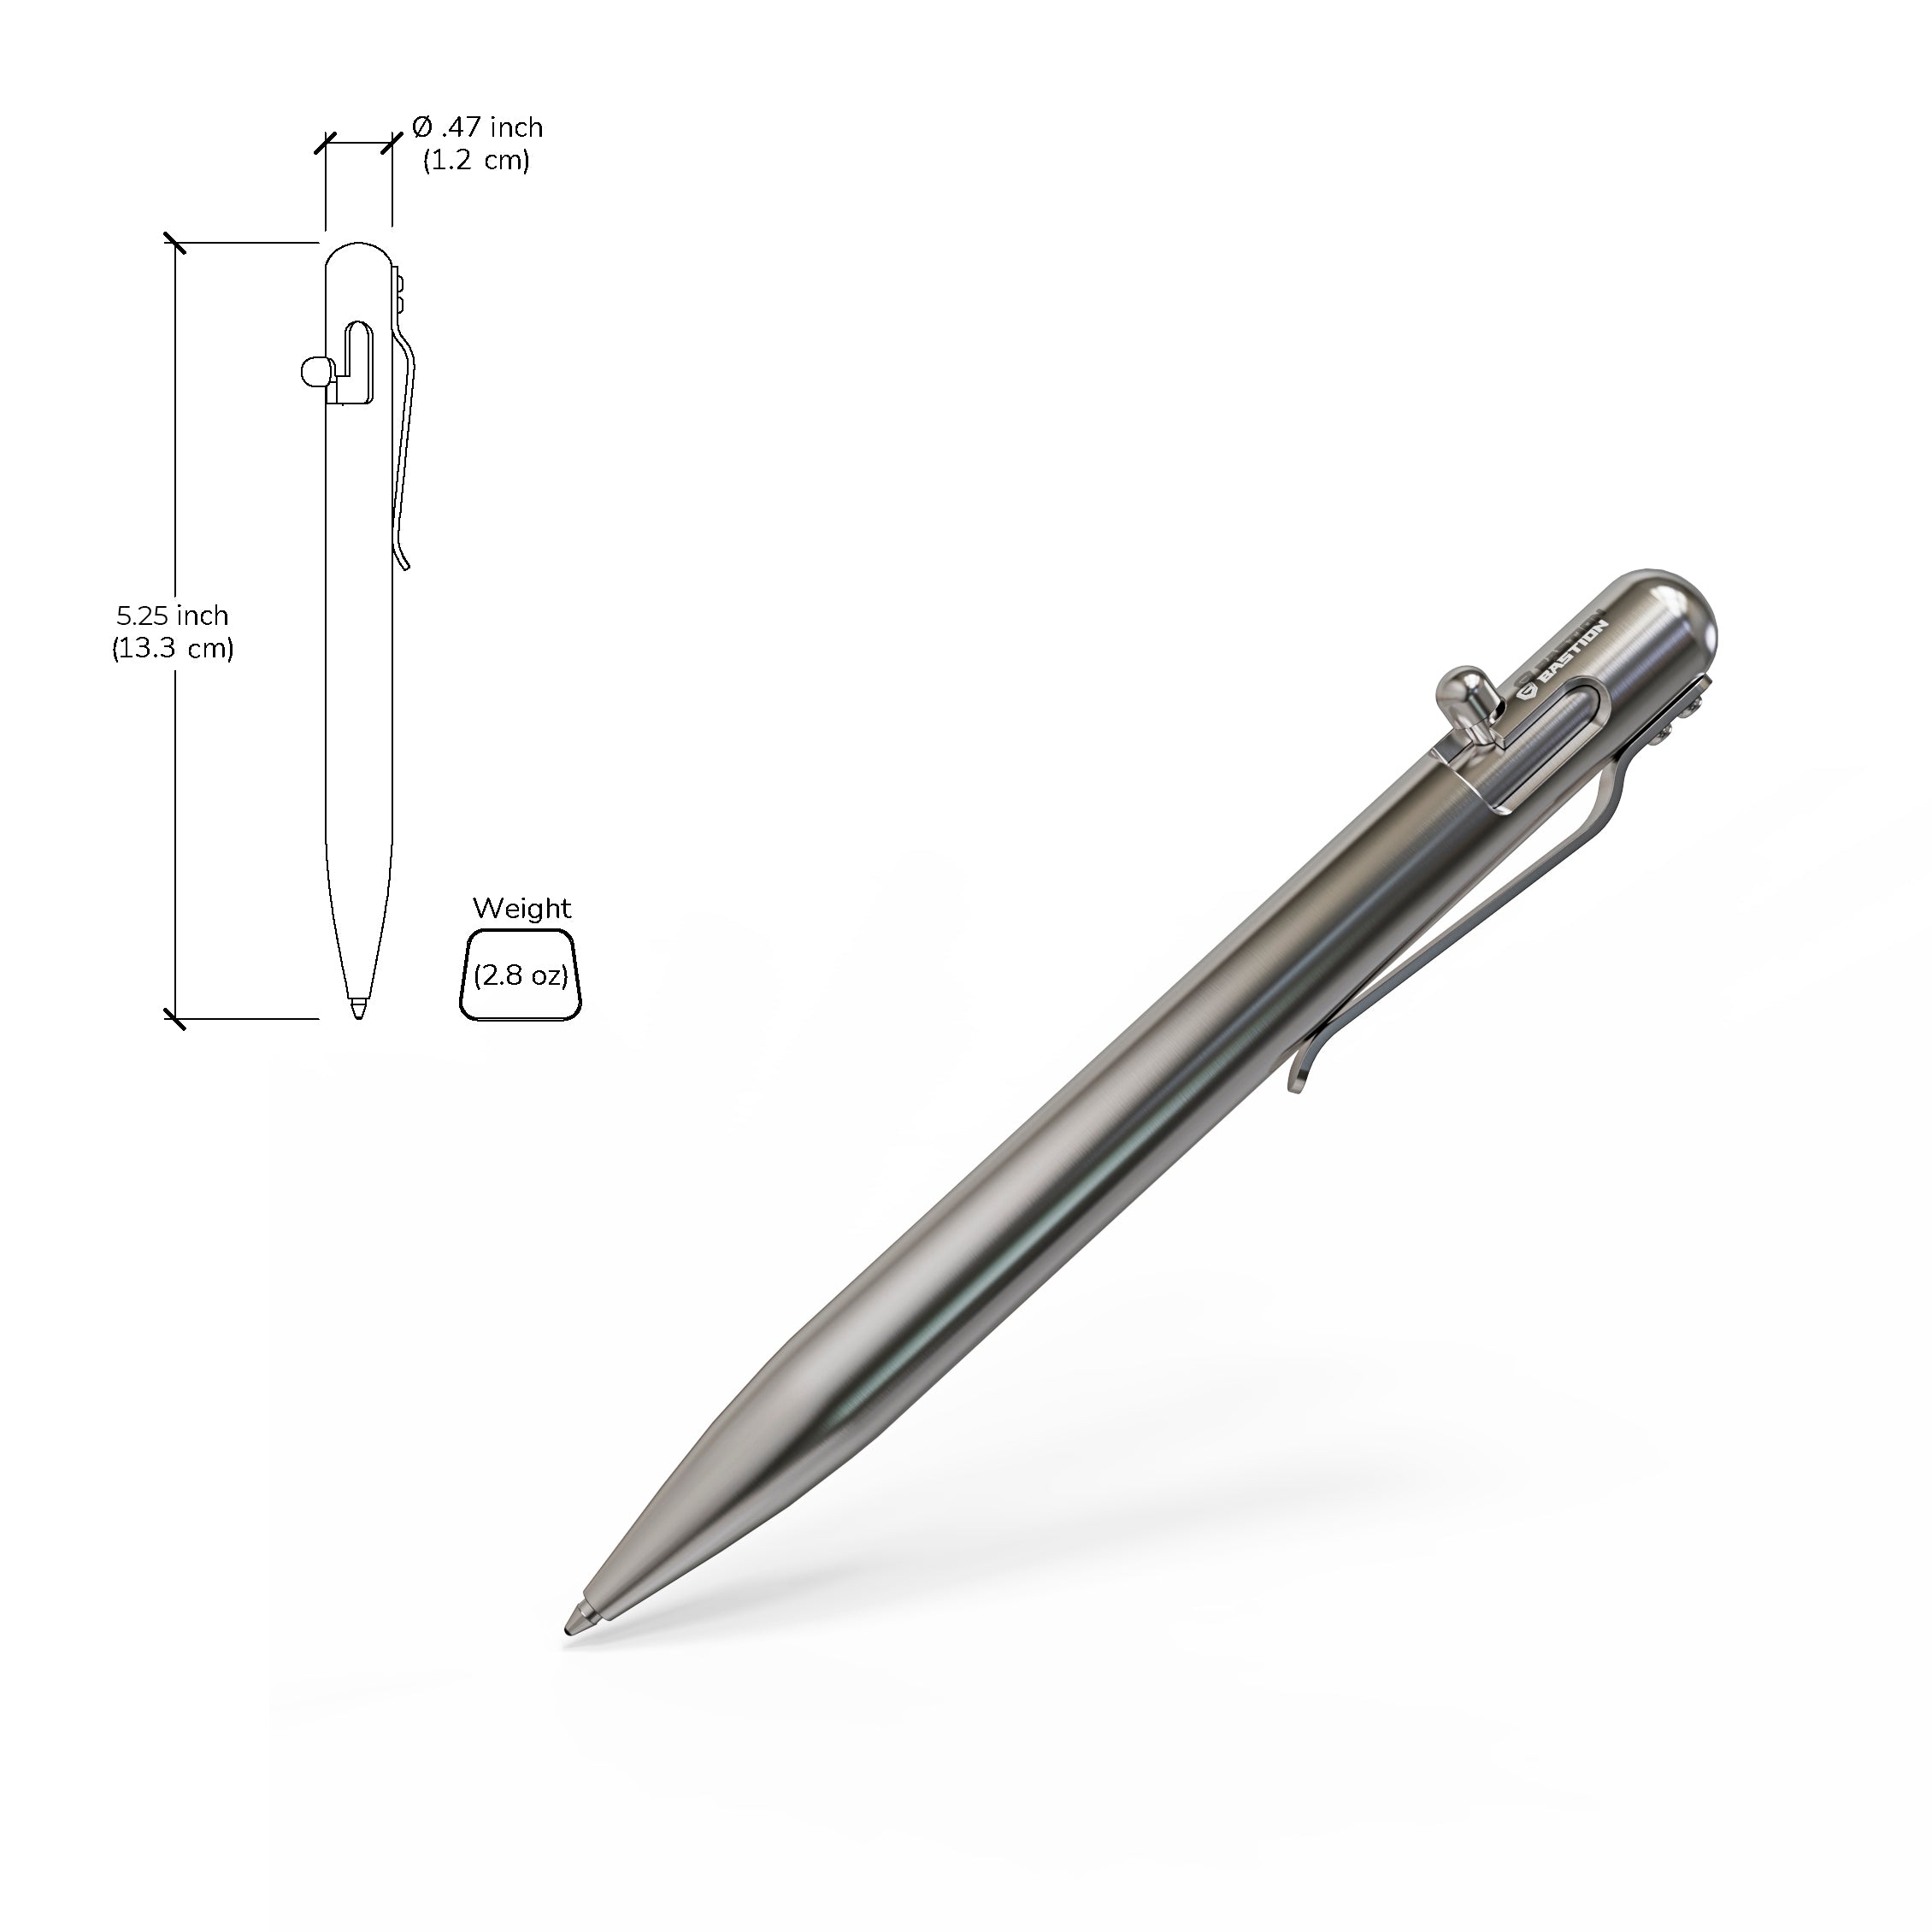 Stainless Steel, 3X - Bolt Action Pen by Bastion®